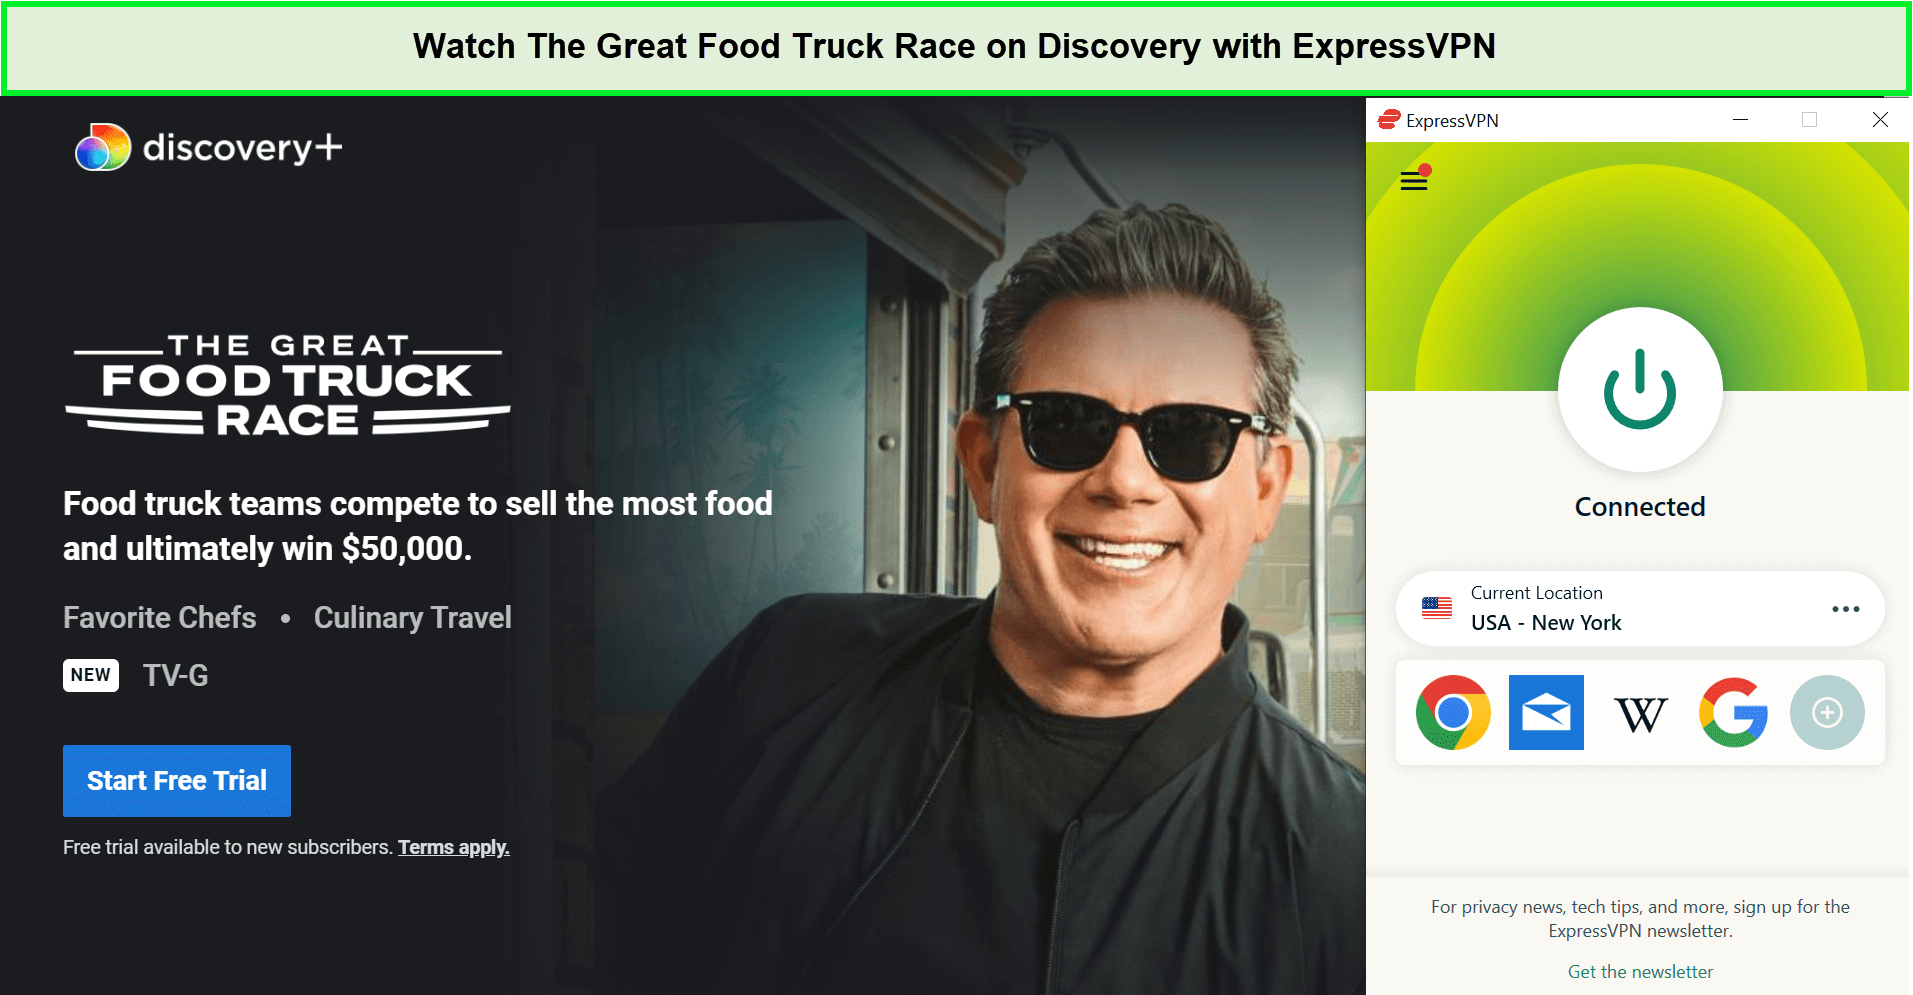 Watch-The-Great-Food-Truck-Race-in-hk-on-Discovery-with-ExpressVPN